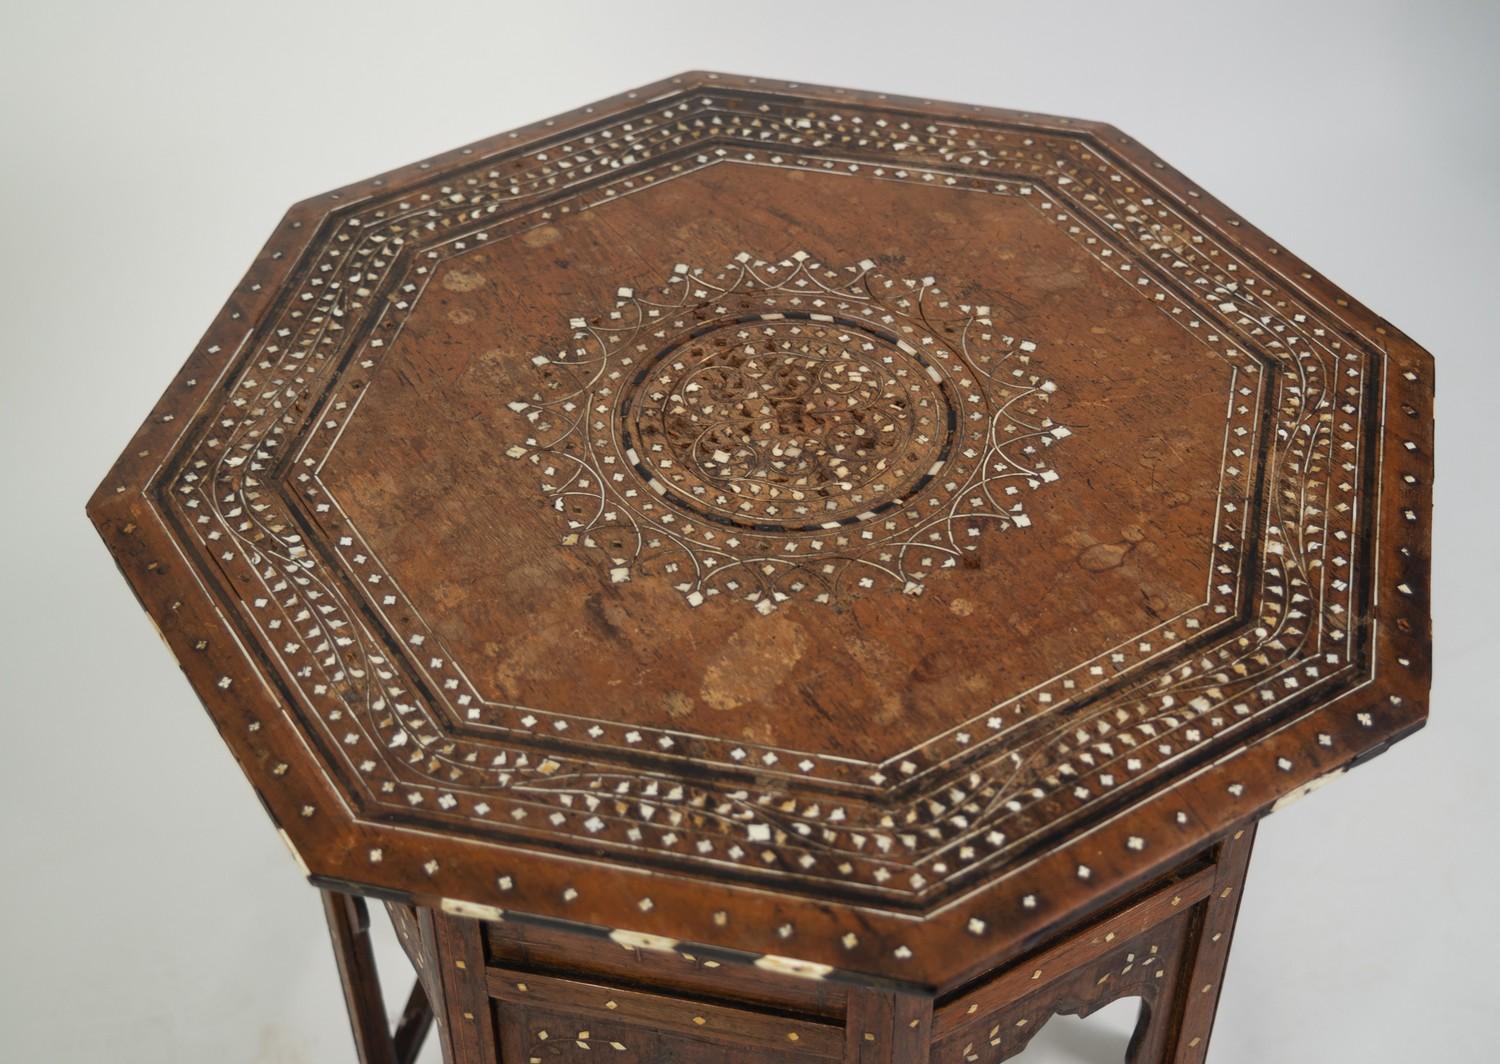 EARLY TWENTIETH CENTURY MIDDLE EASTERN INLAID WALNUT OCCASIONAL TABLE, the octagonal top inlaid with - Image 2 of 3